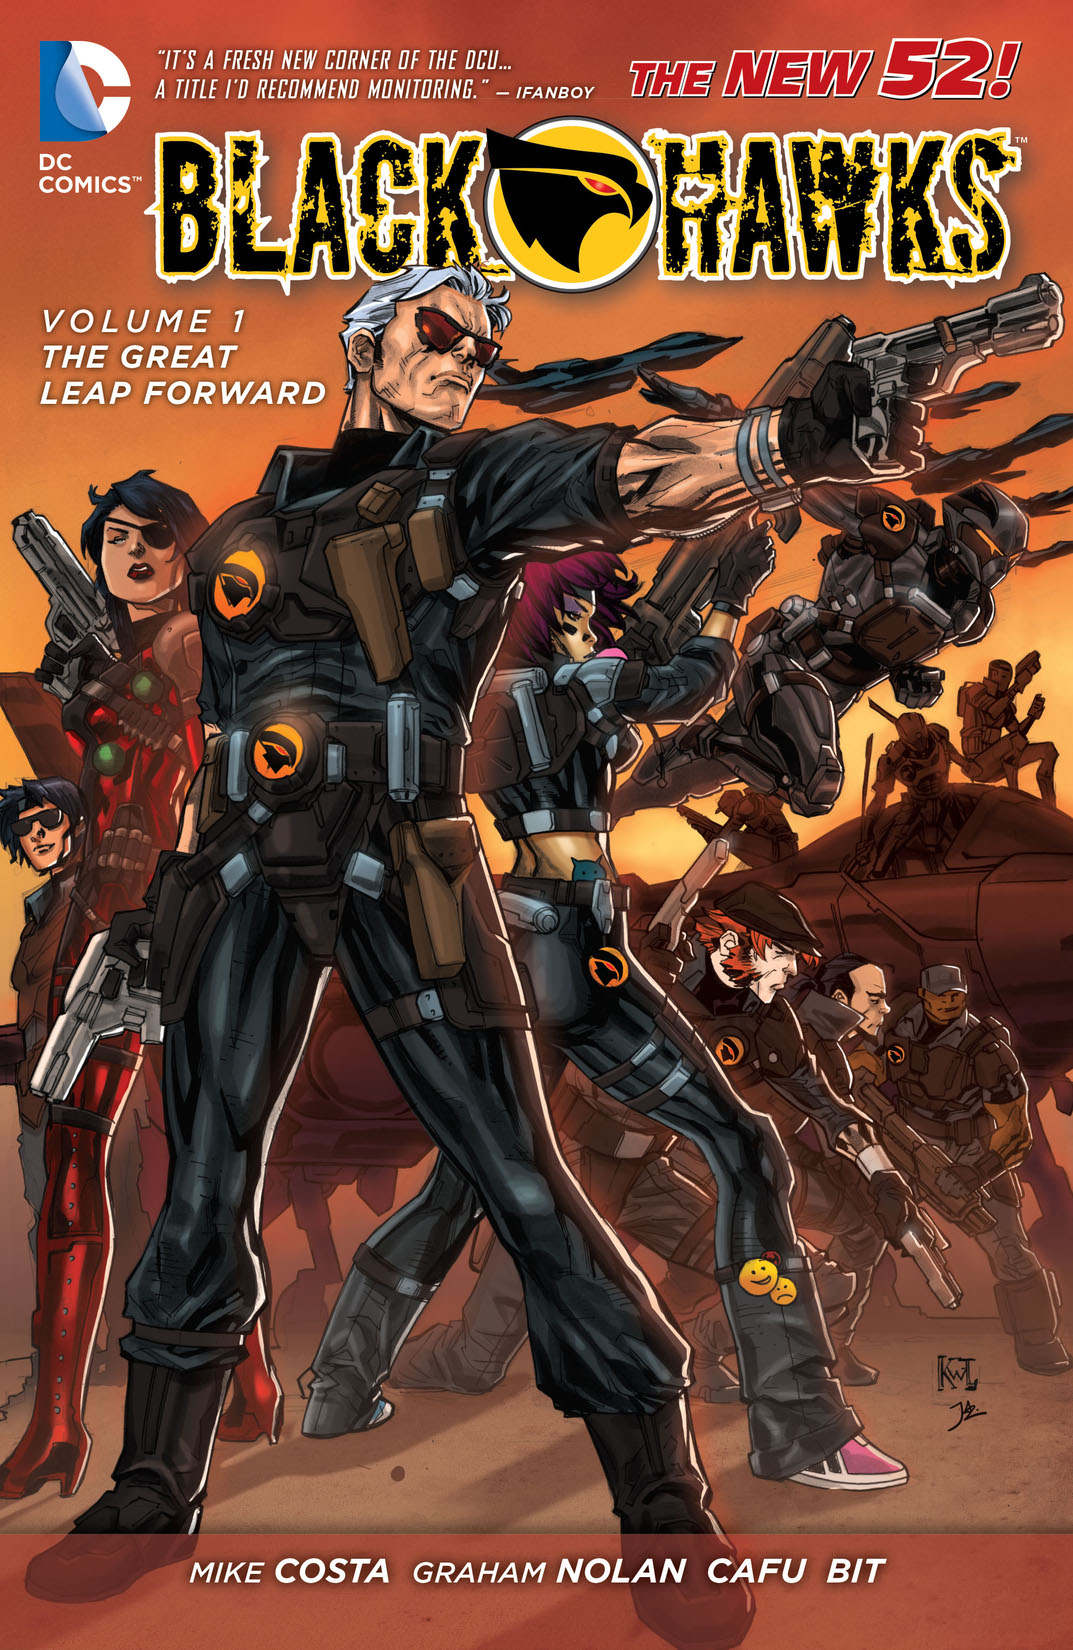 Blackhawks Vol. 1: The Great Leap Forward preview images